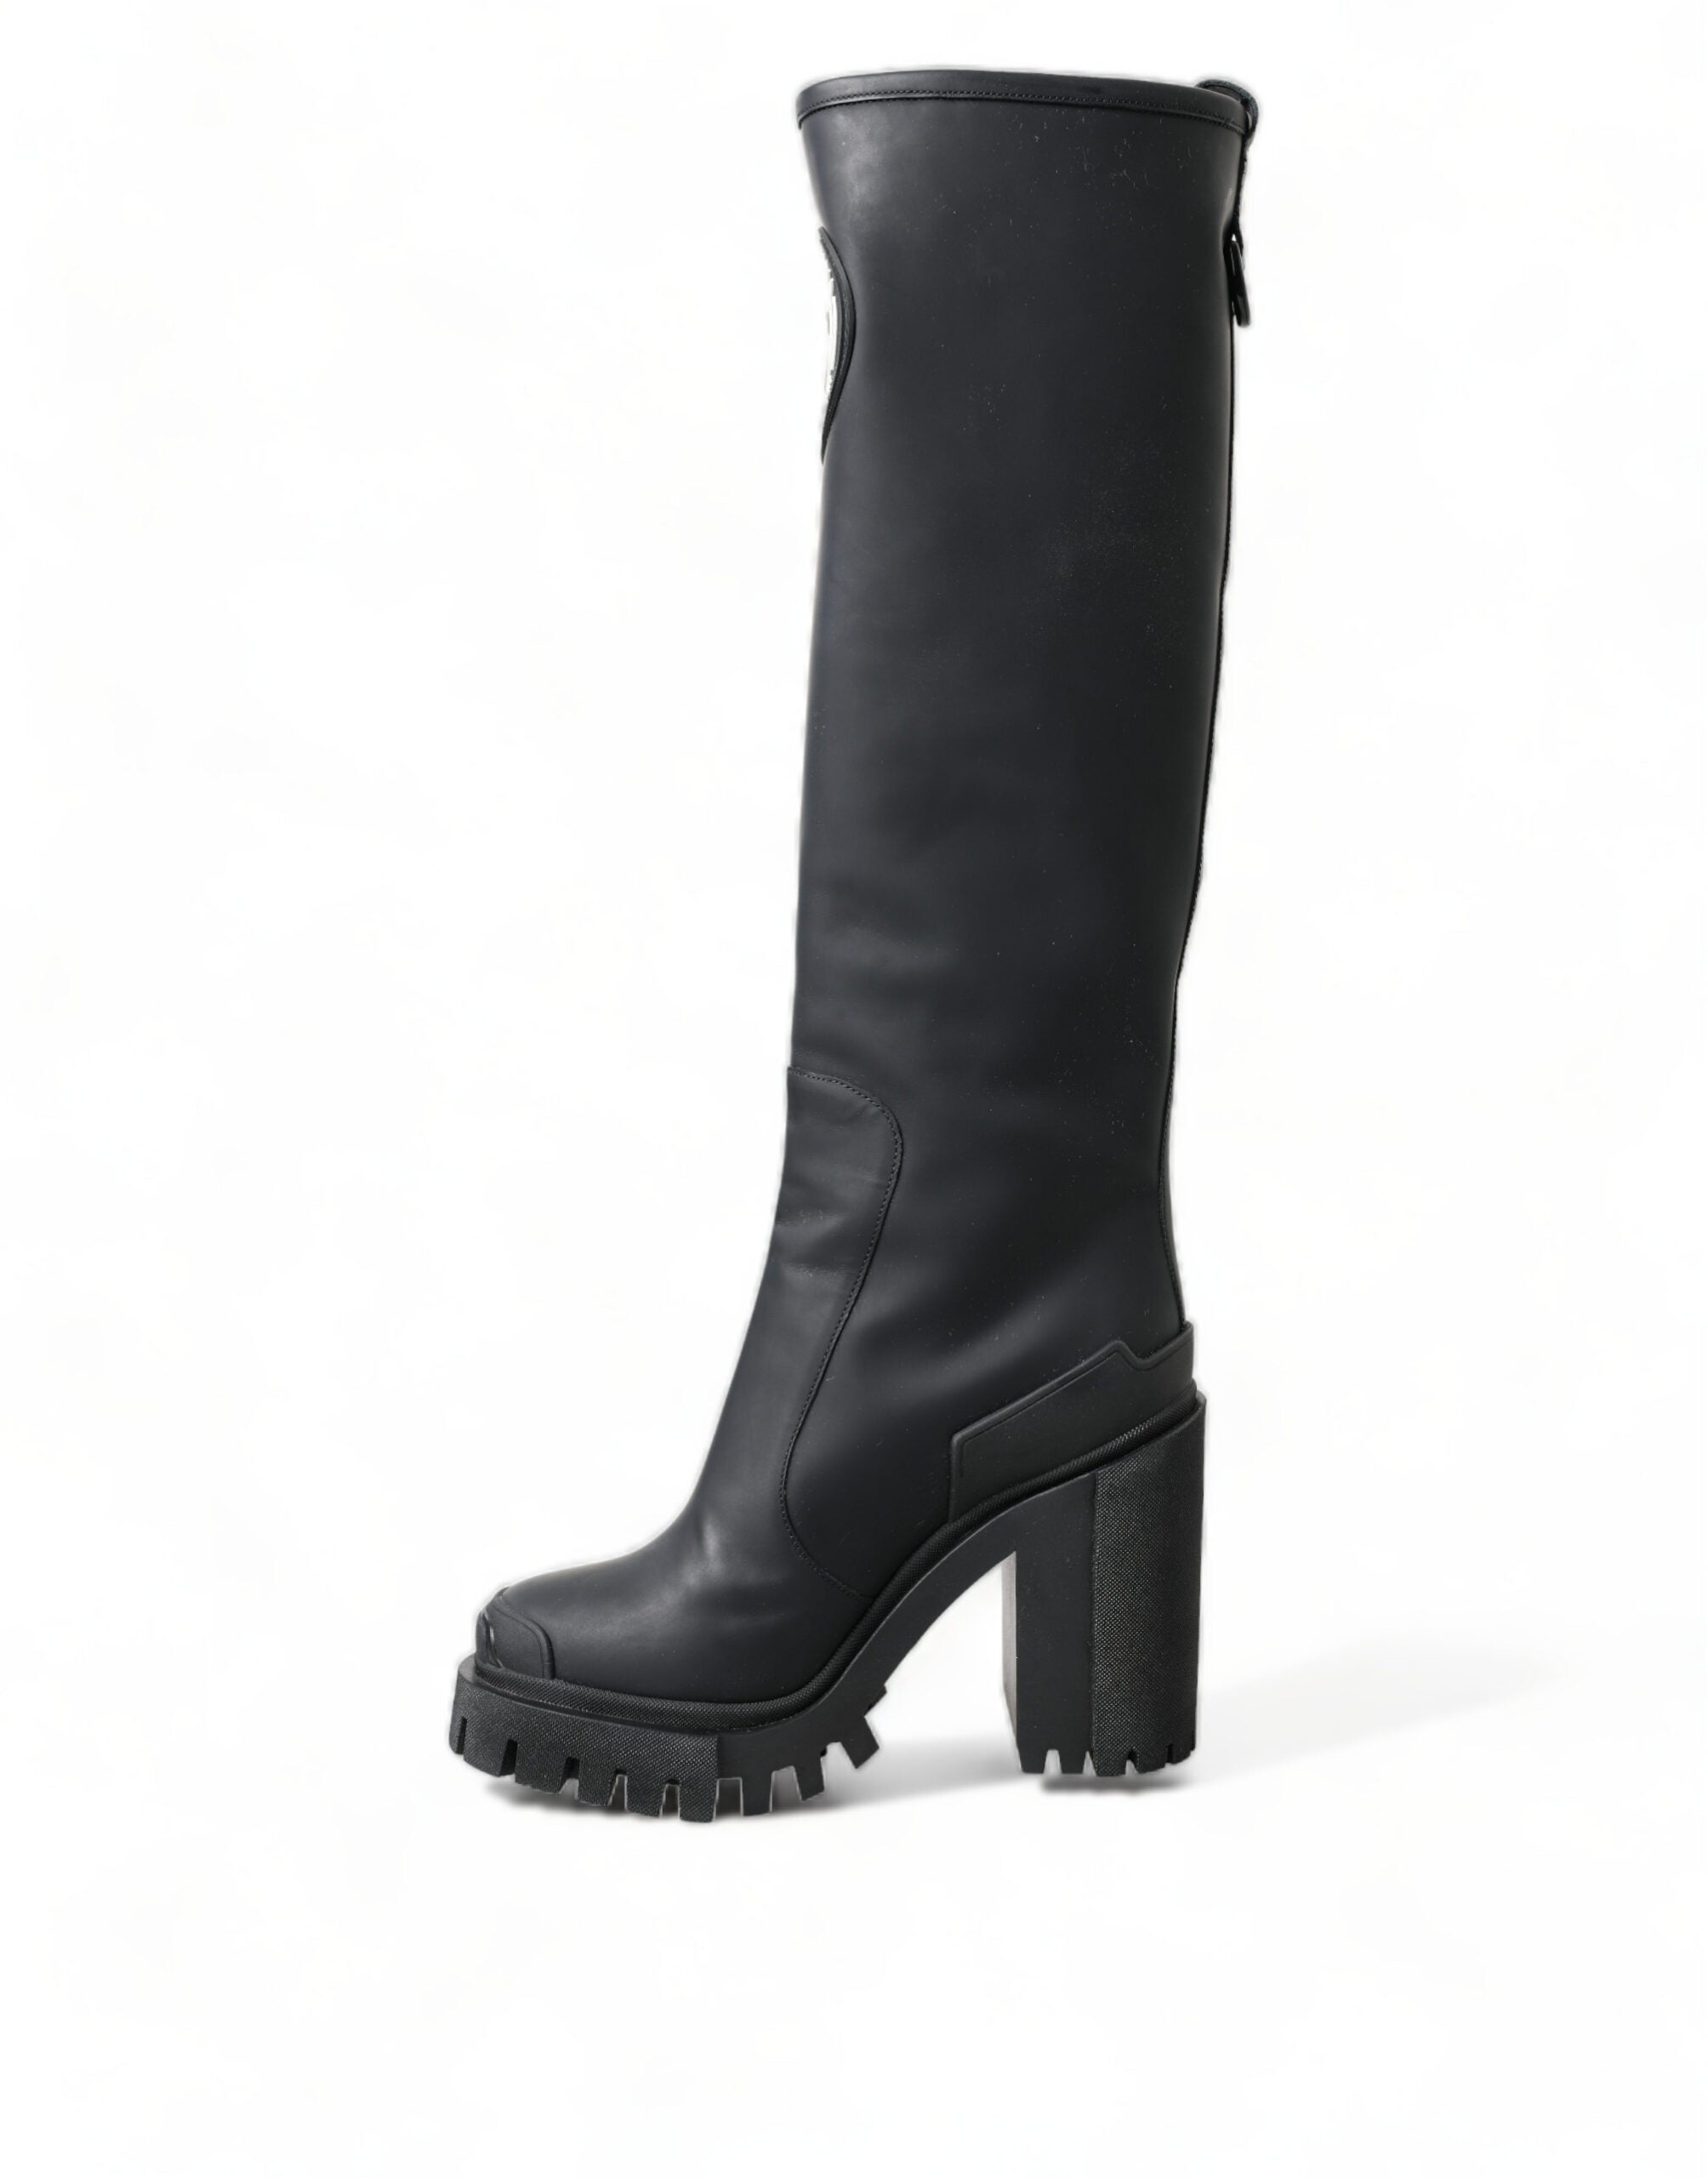 Dolce & Gabbana Black Rubber Leather High Boots Shoes